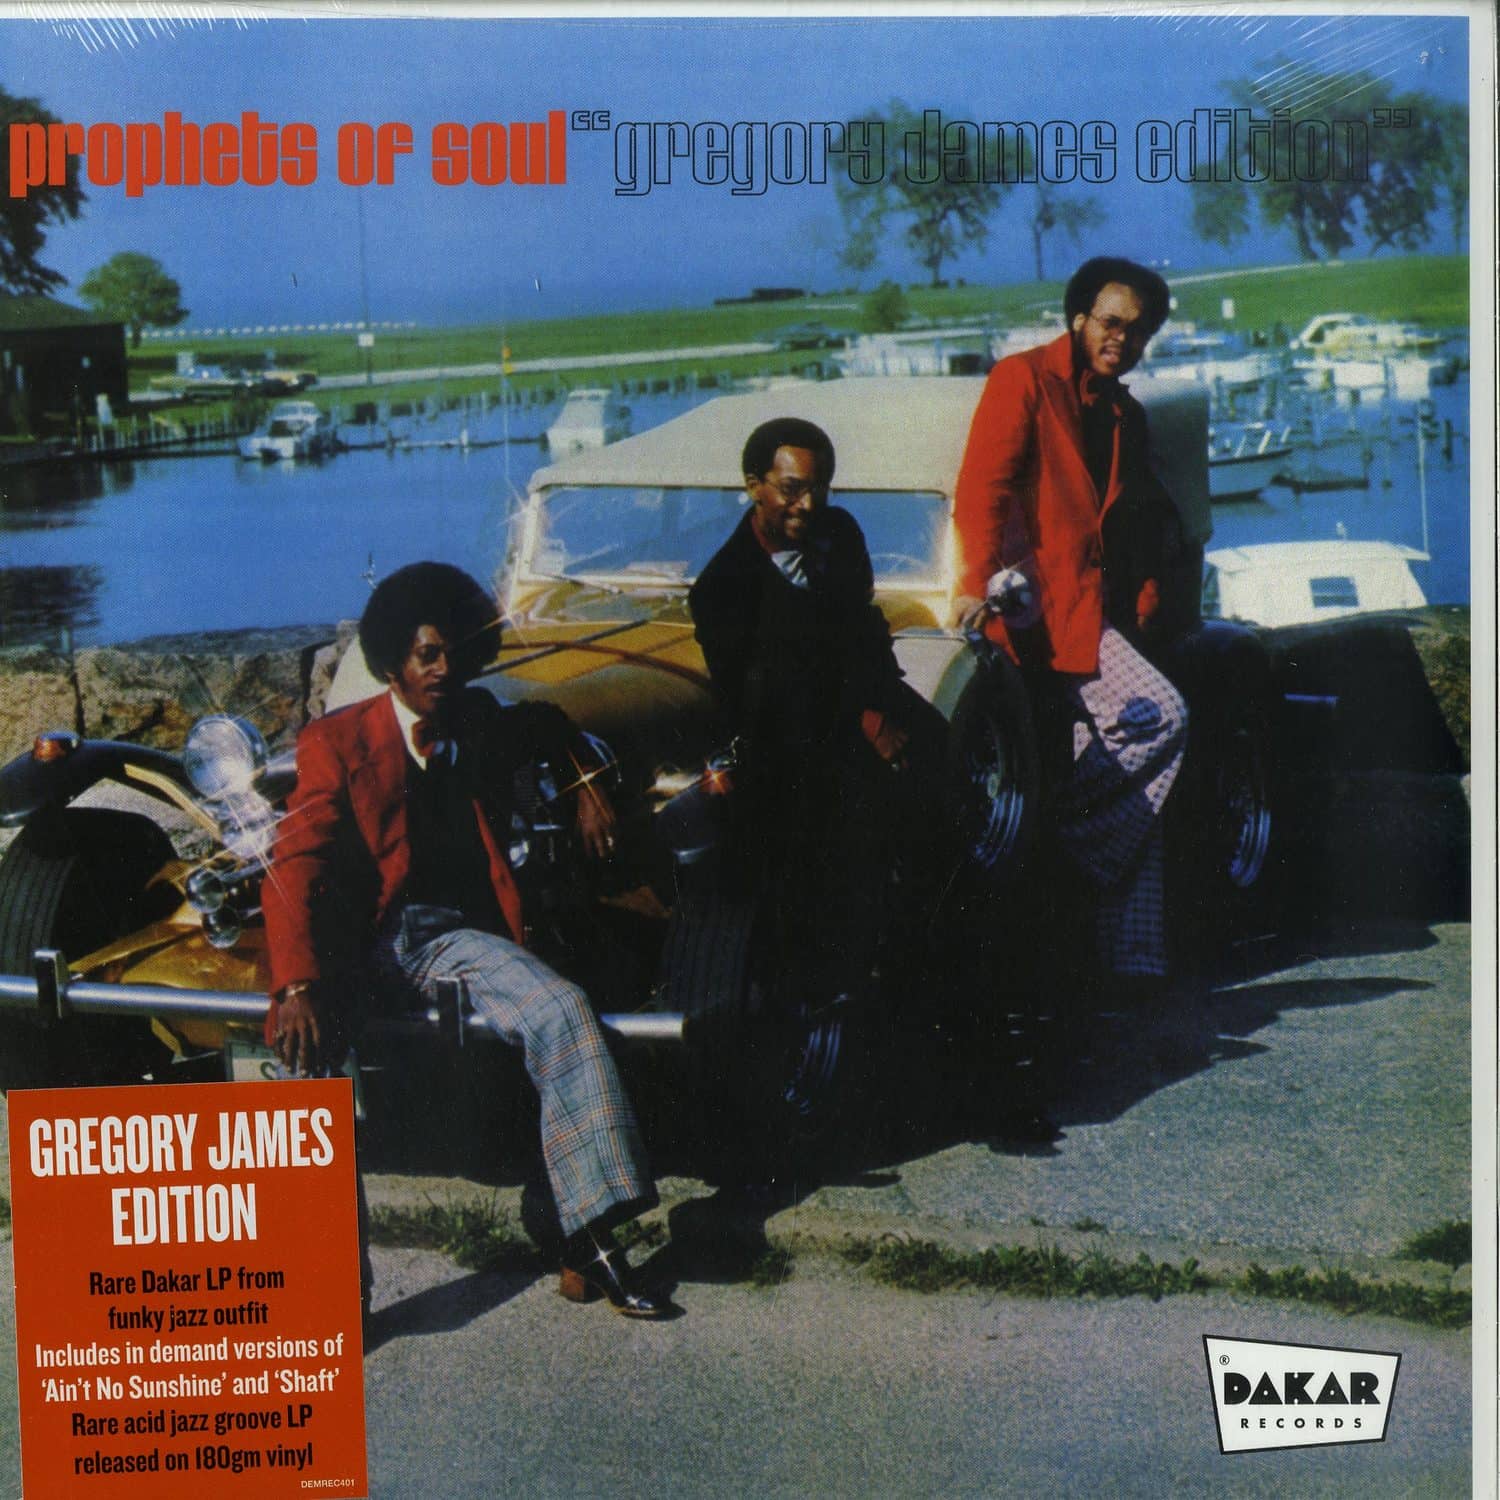 Gregory James Edition - PROPHETS OF SOUL 